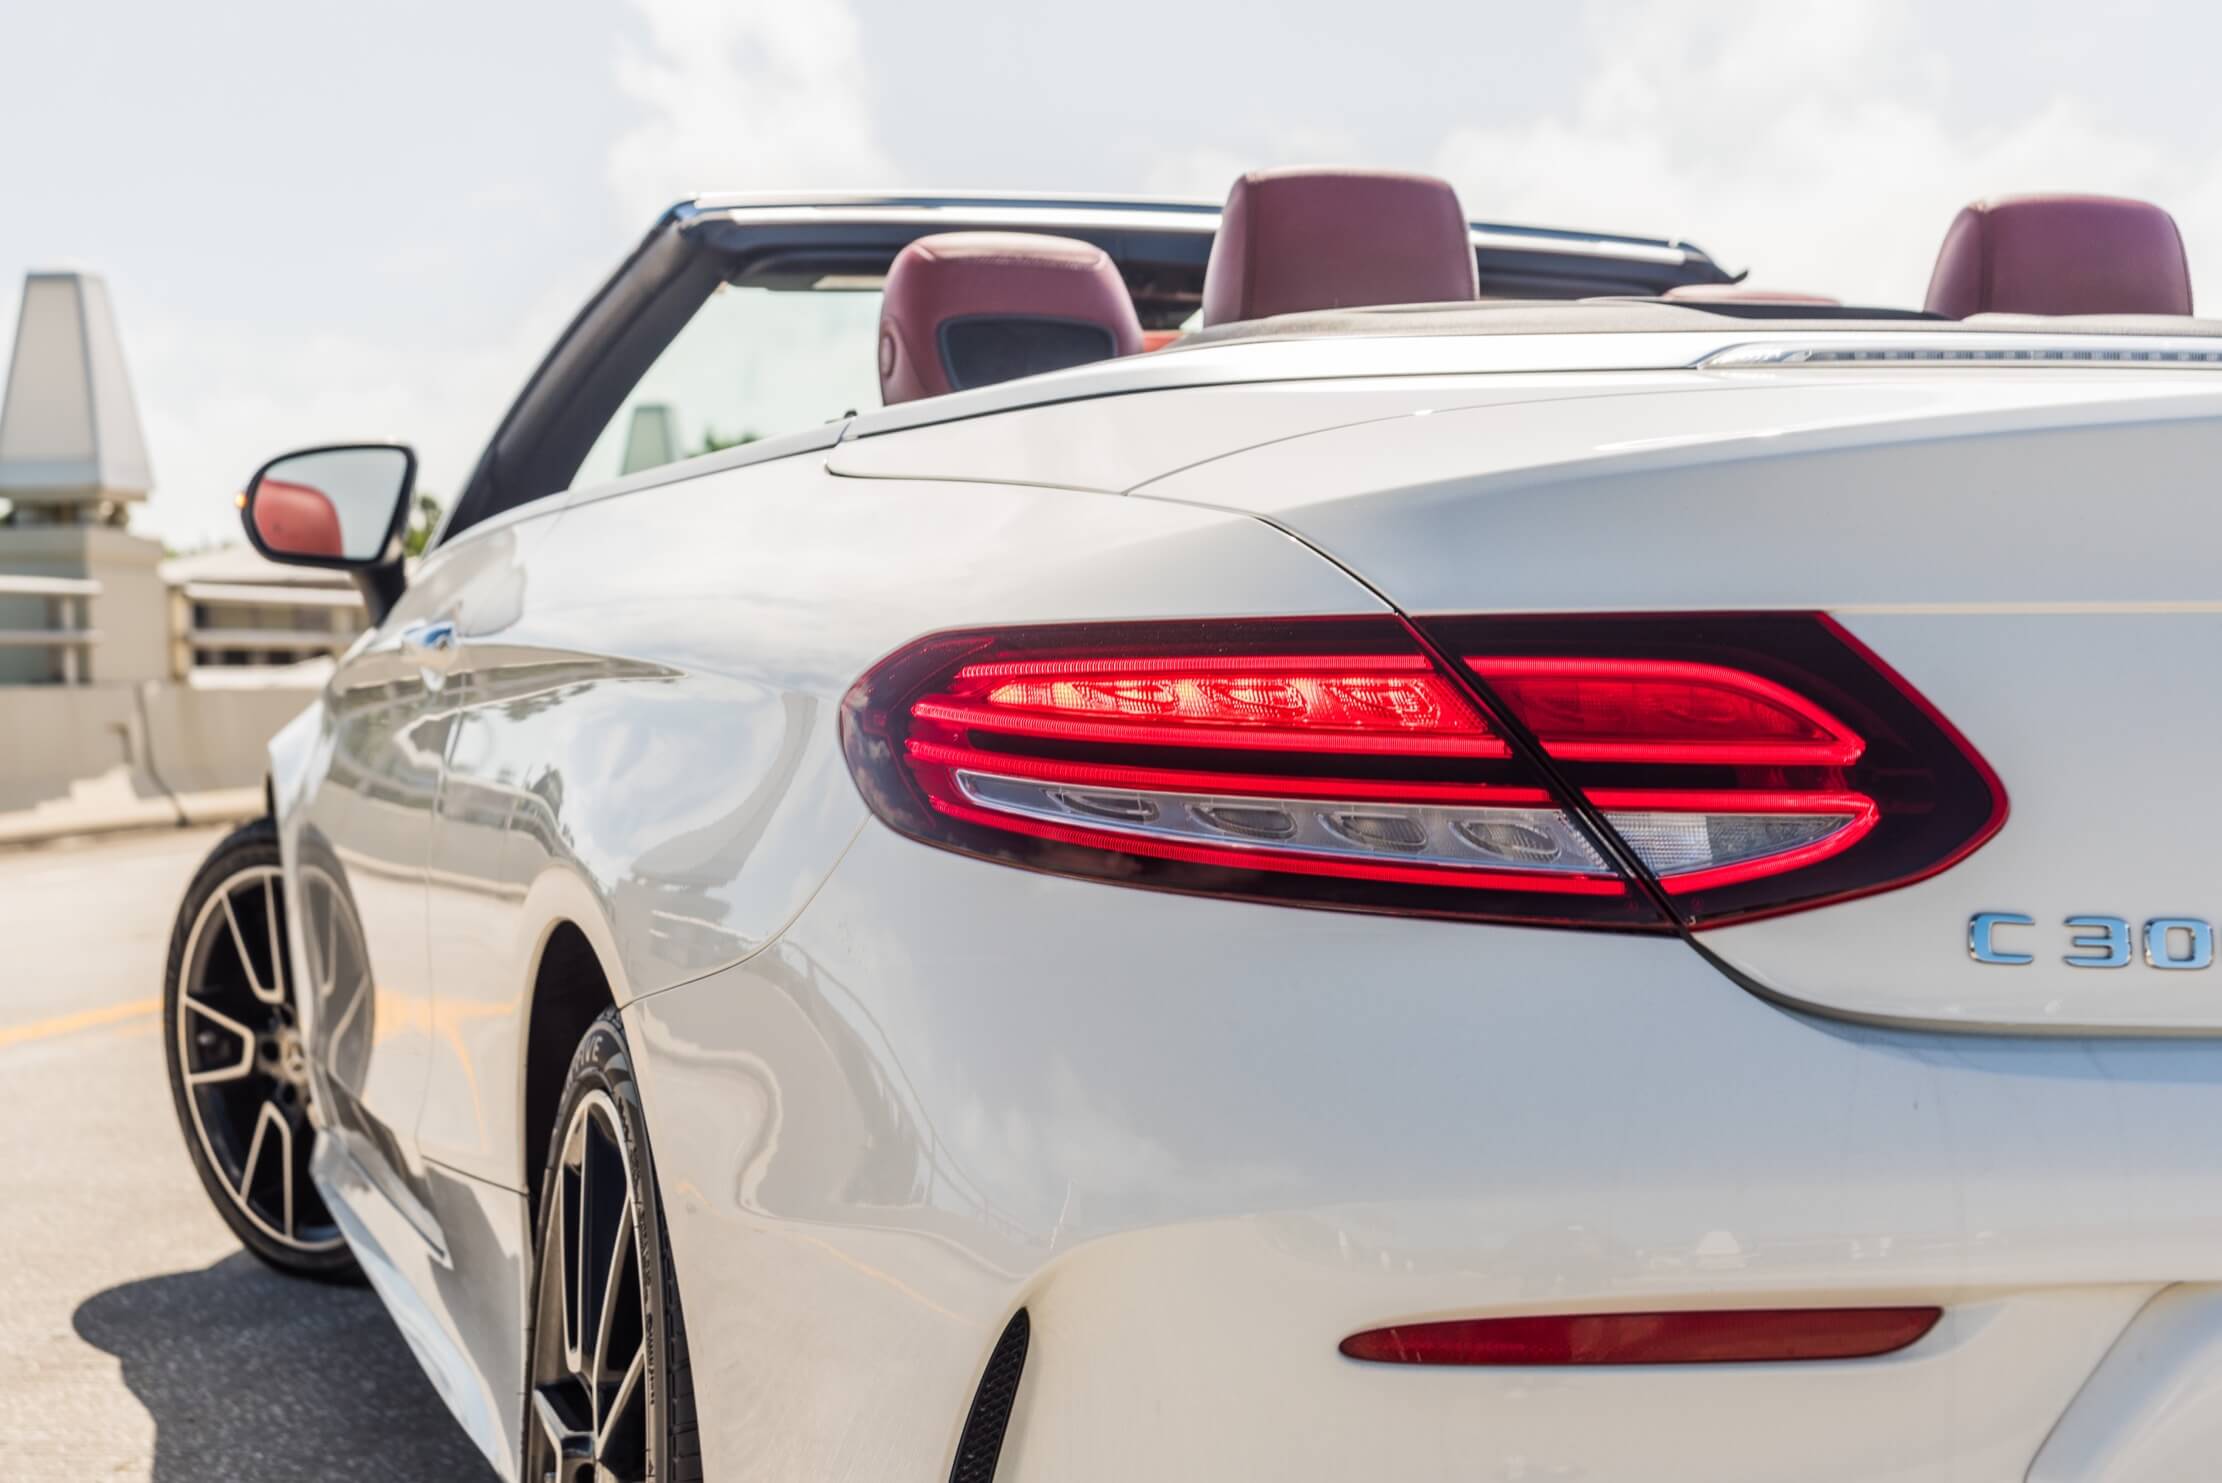 2019_MERCEDES BENZ_C300-CONVERTIBLE_WHITE-RED_46